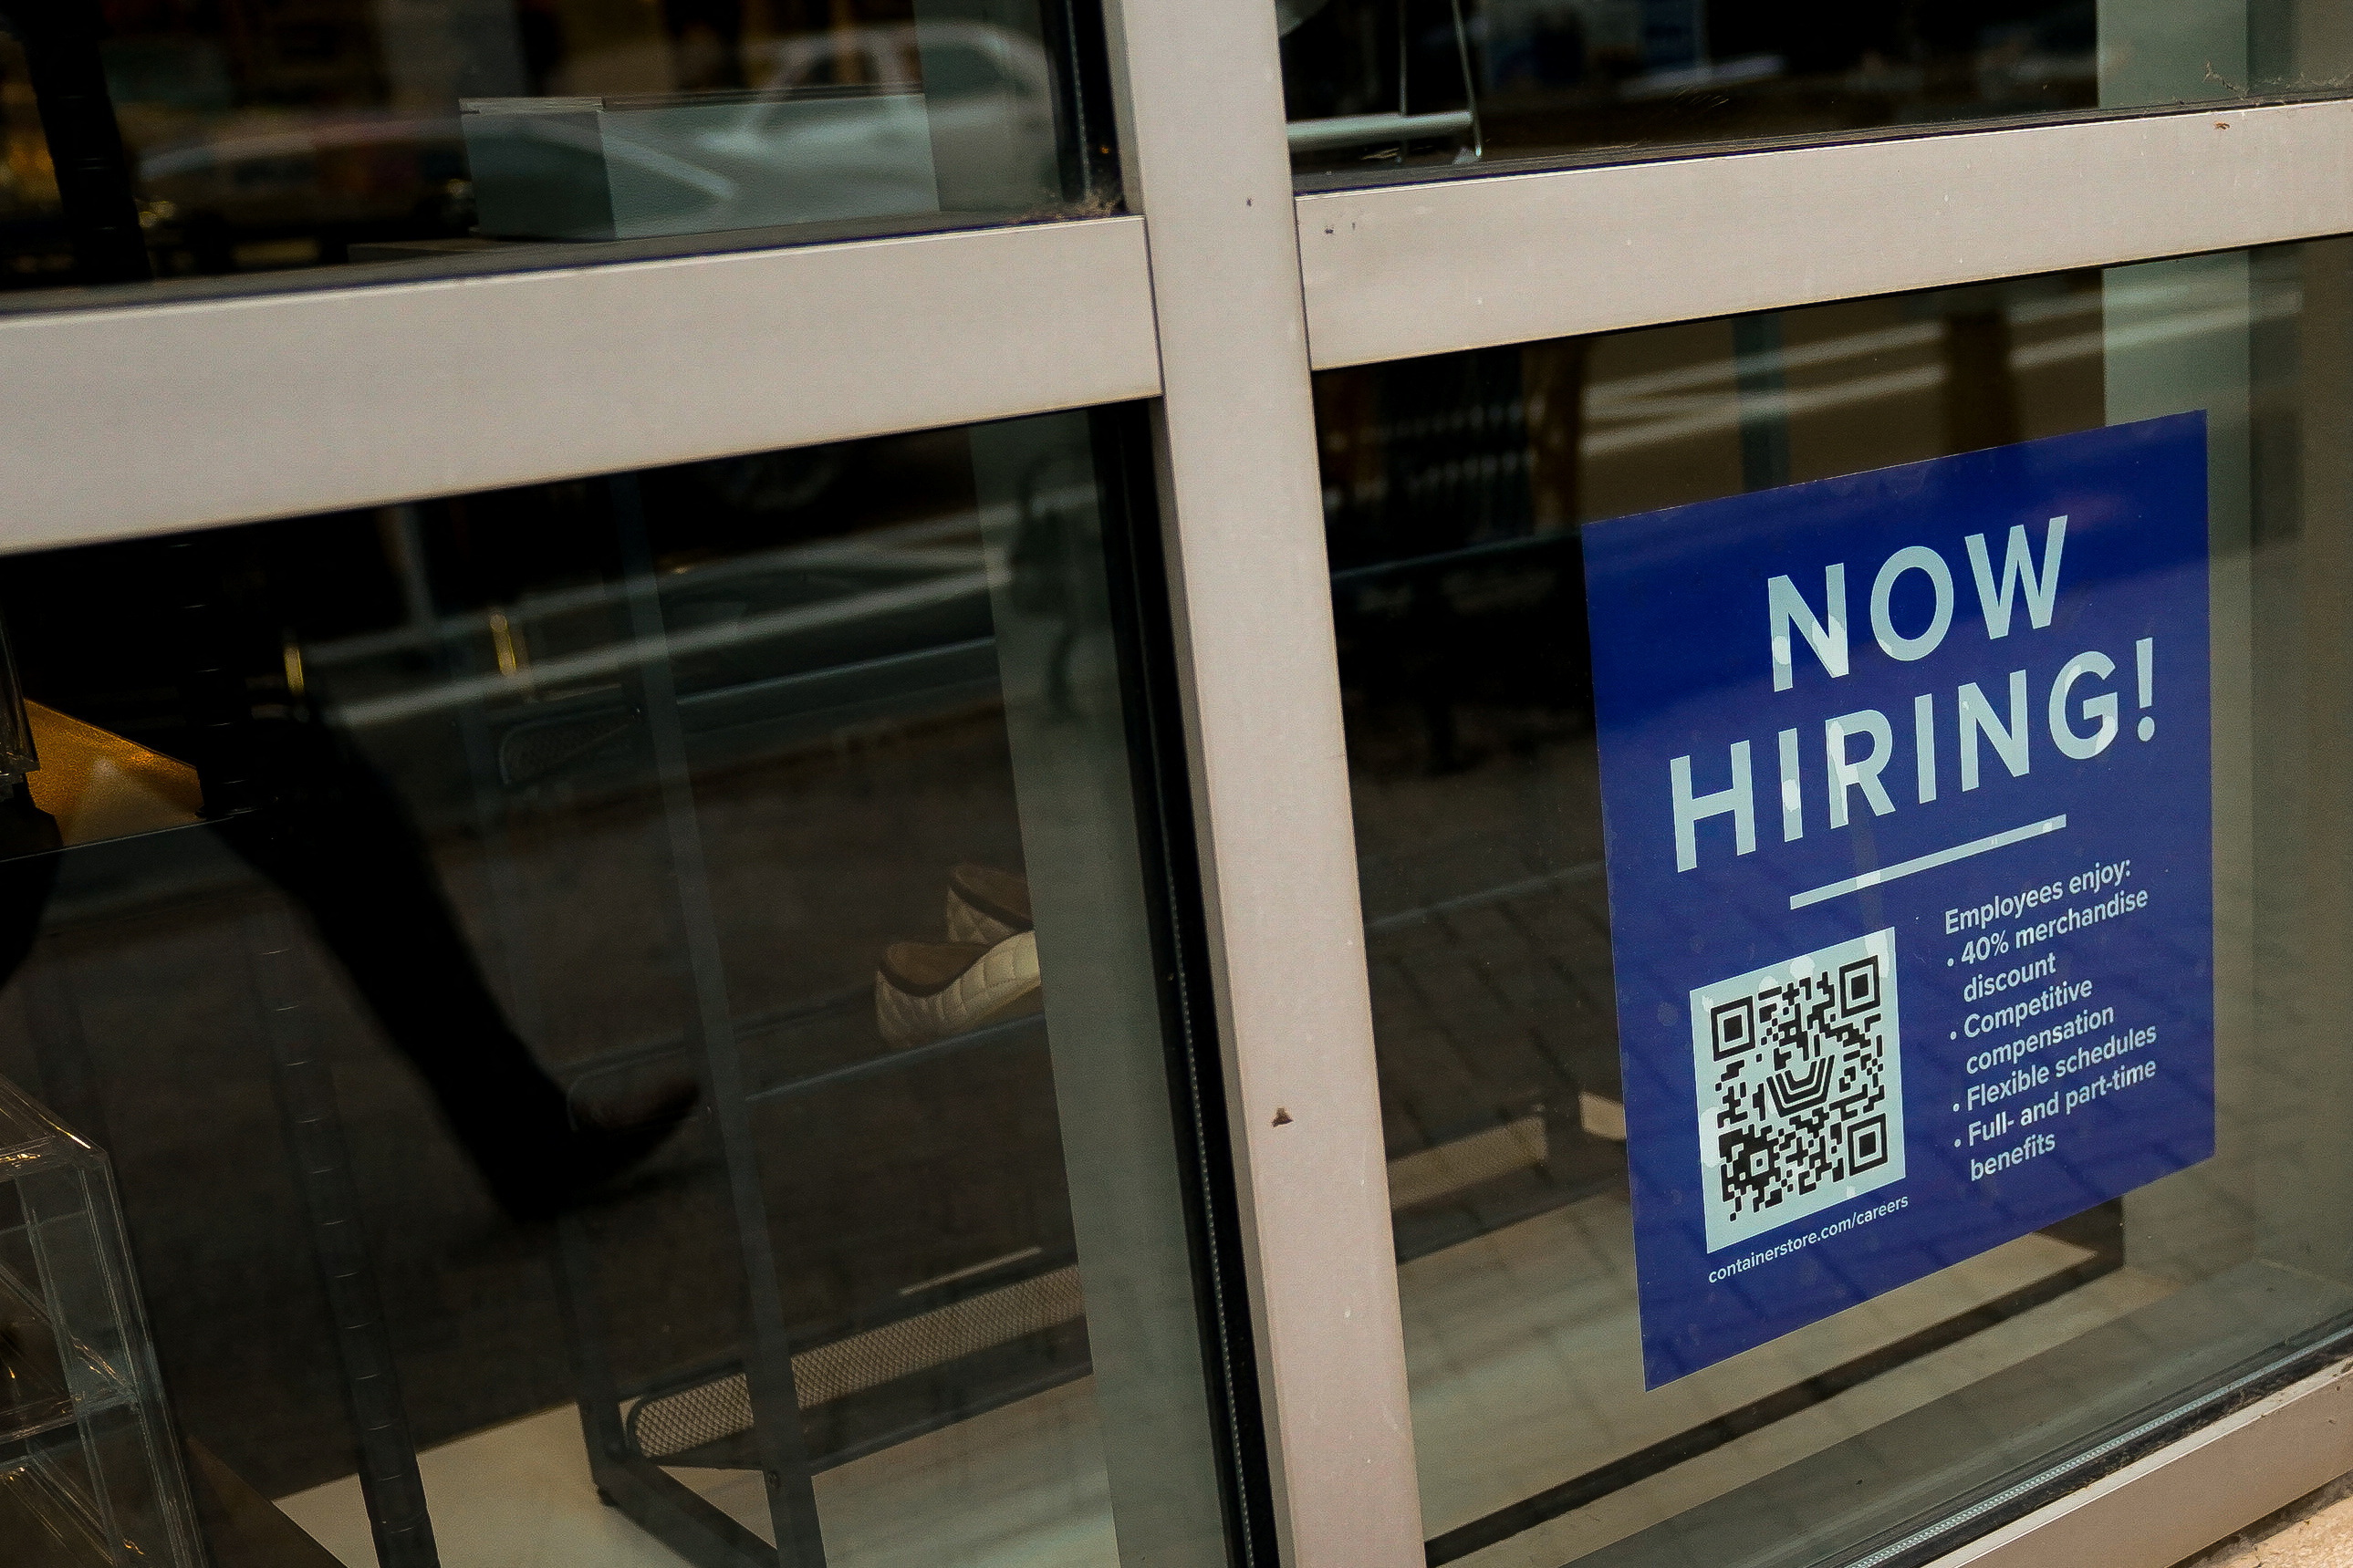 An employee employment sign with a QR code appears in an Arlington business window